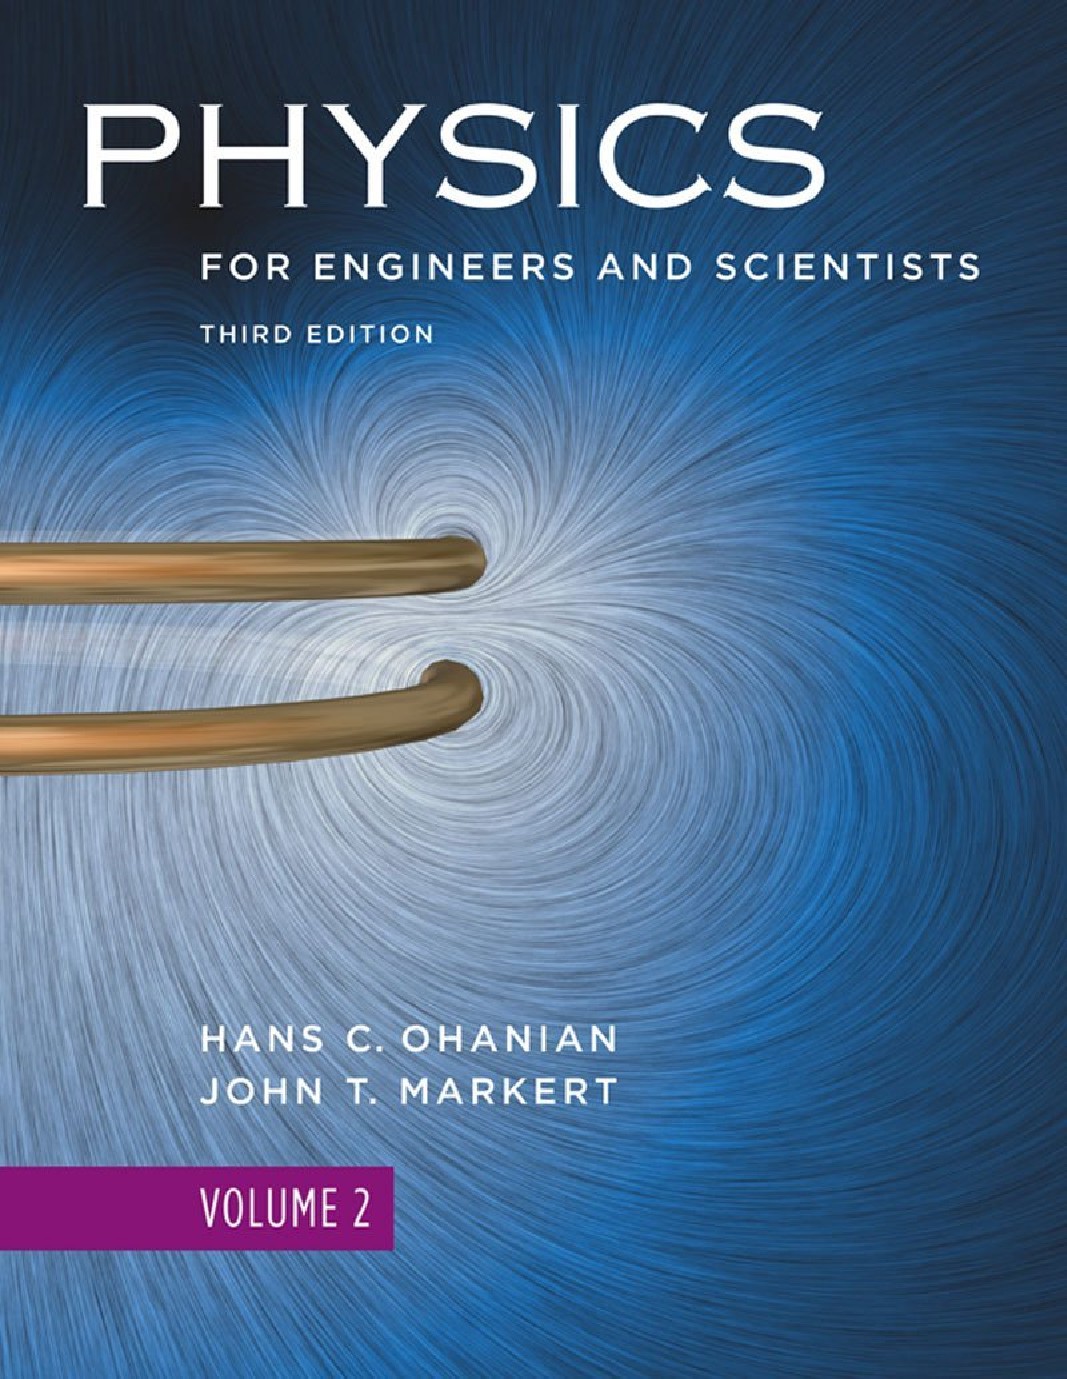 Physics for Engineers and Scientists 3rd Edition Vol 2